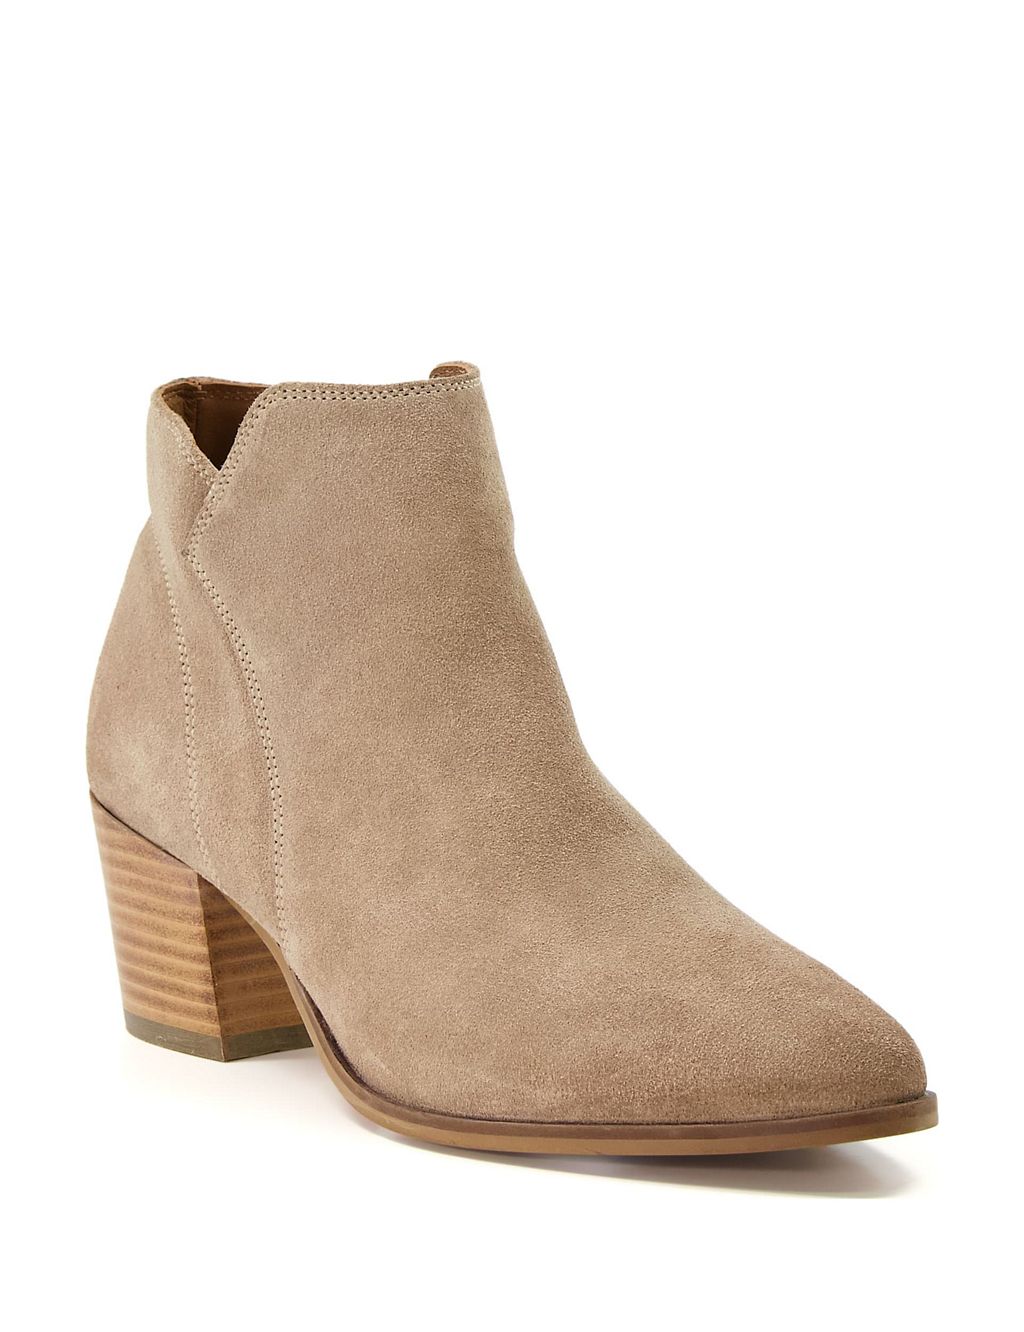 Leather Block Heel Ankle Boots 1 of 5